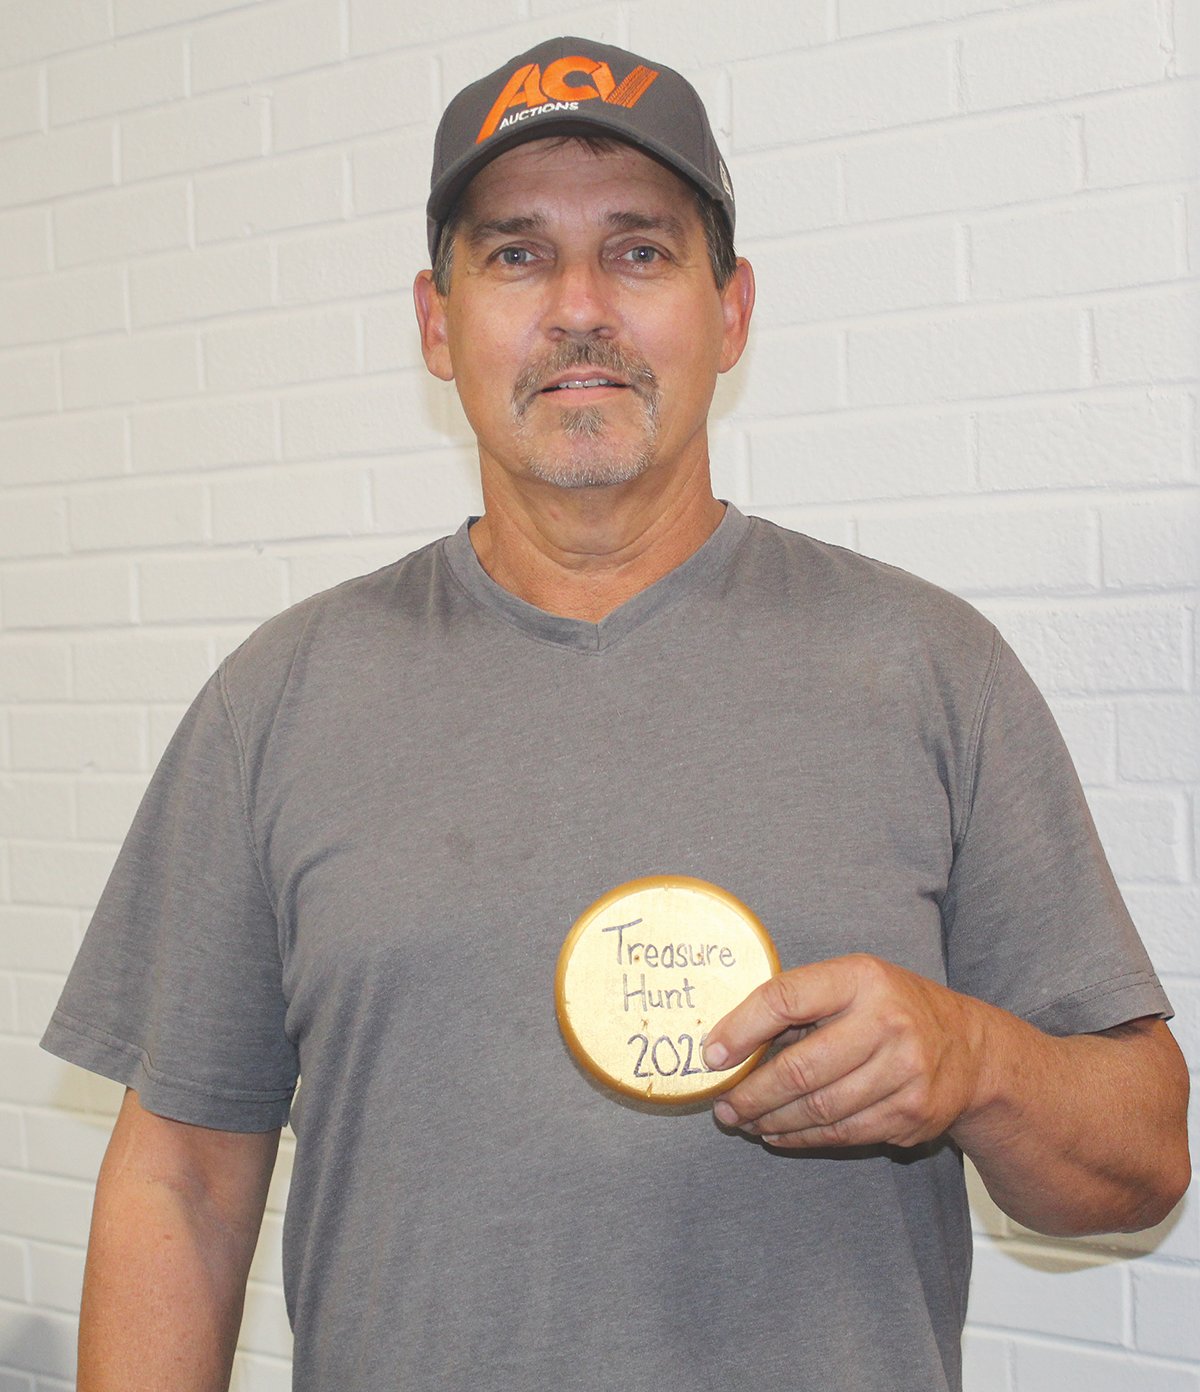 Mark Smith of Crawfordsville was this week’s winner in the Journal Review Treasure Hunt. Smith found the gold medallion by the big rock at Davidson’s Greenhouse. He won $100 for cracking the code. A new hunt begins Monday when new clues appear in the newspaper.